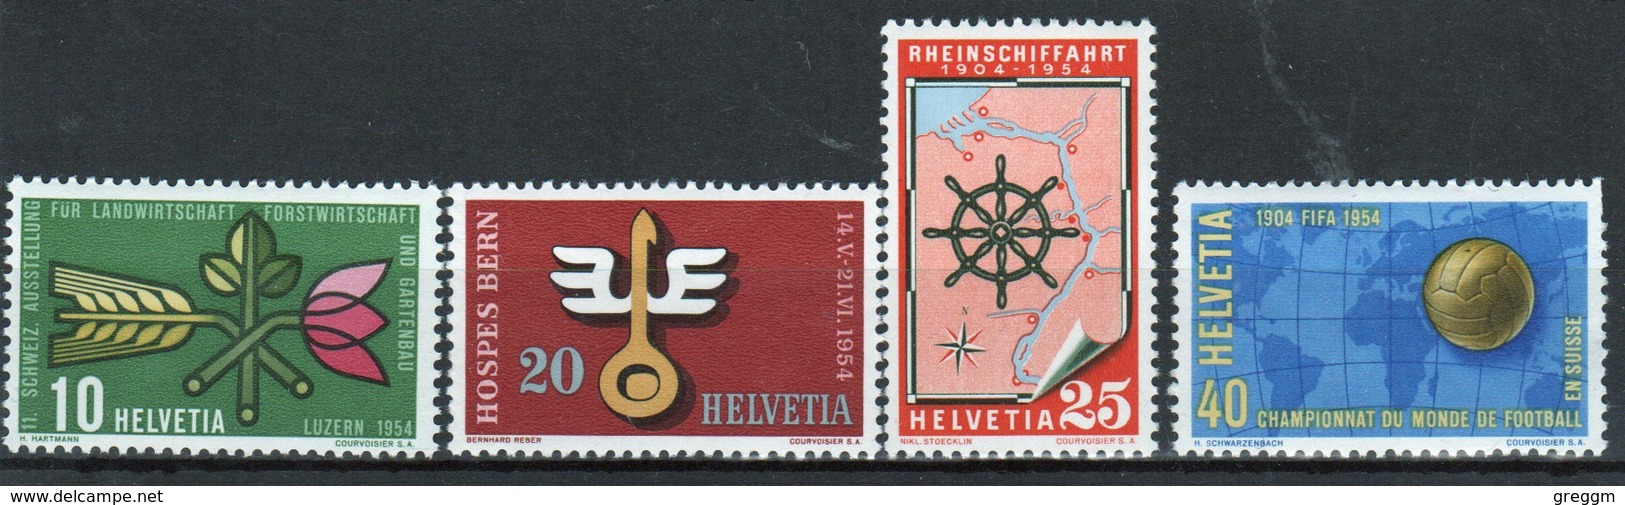 Switzerland 1954 Set Of Stamps To Issued To Commemorate Publicity Issue. - Nuovi